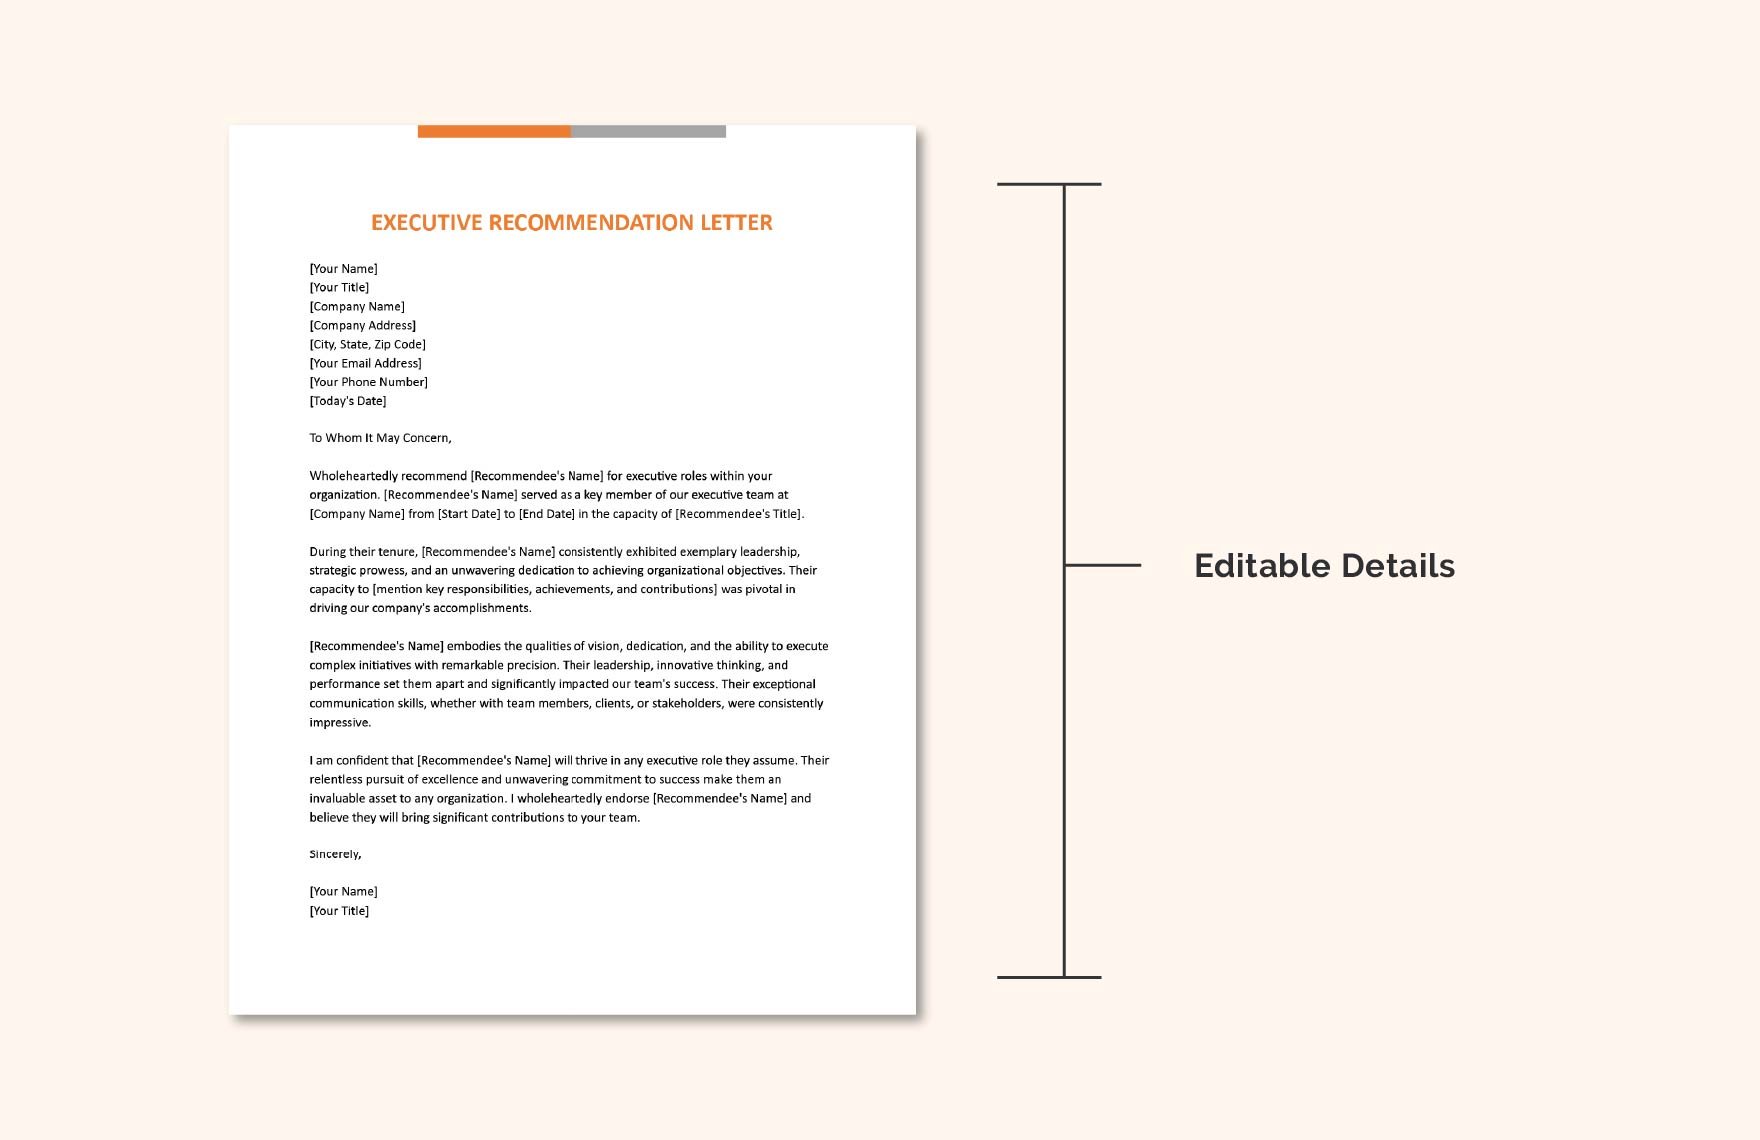 Executive Recommendation Letter